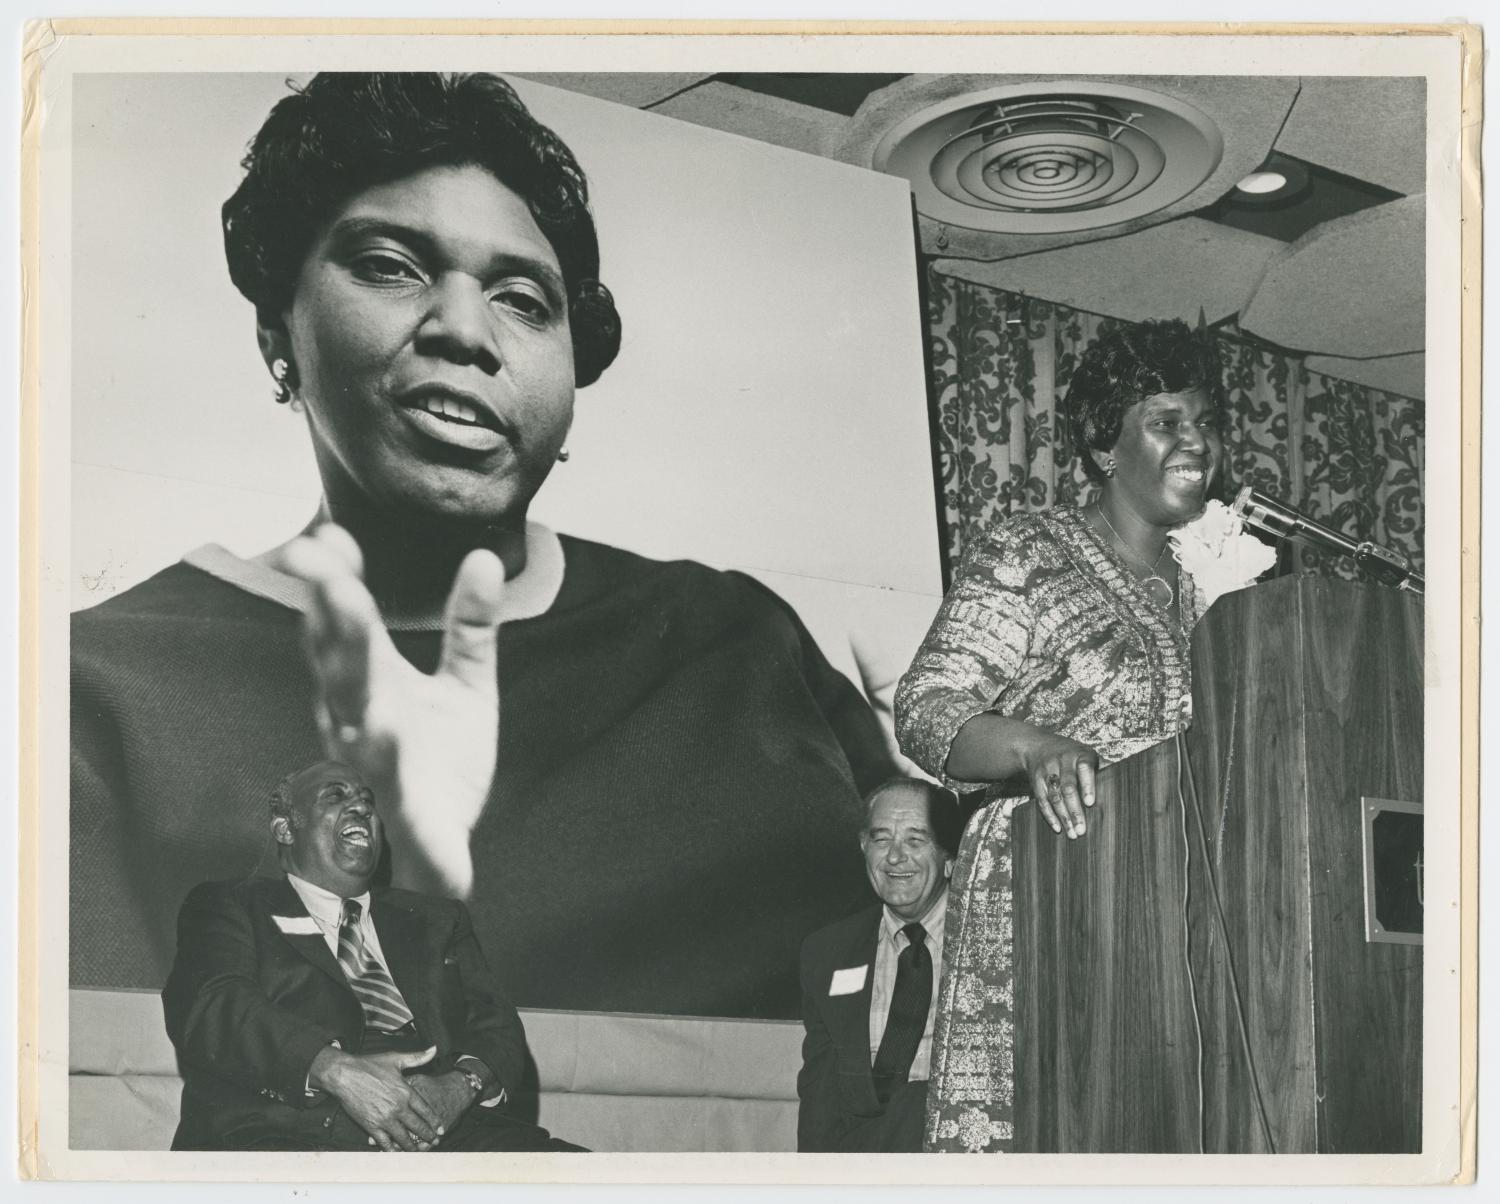 Barbara Jordan stands at a podium at a fundraiser on Oct. 21, 1971, at the Rice Hotel in Houston. An enlarged photograph of Jordan is visible in the background. Mack Hannah and Lyndon B. Johnson sit behind Jordan.